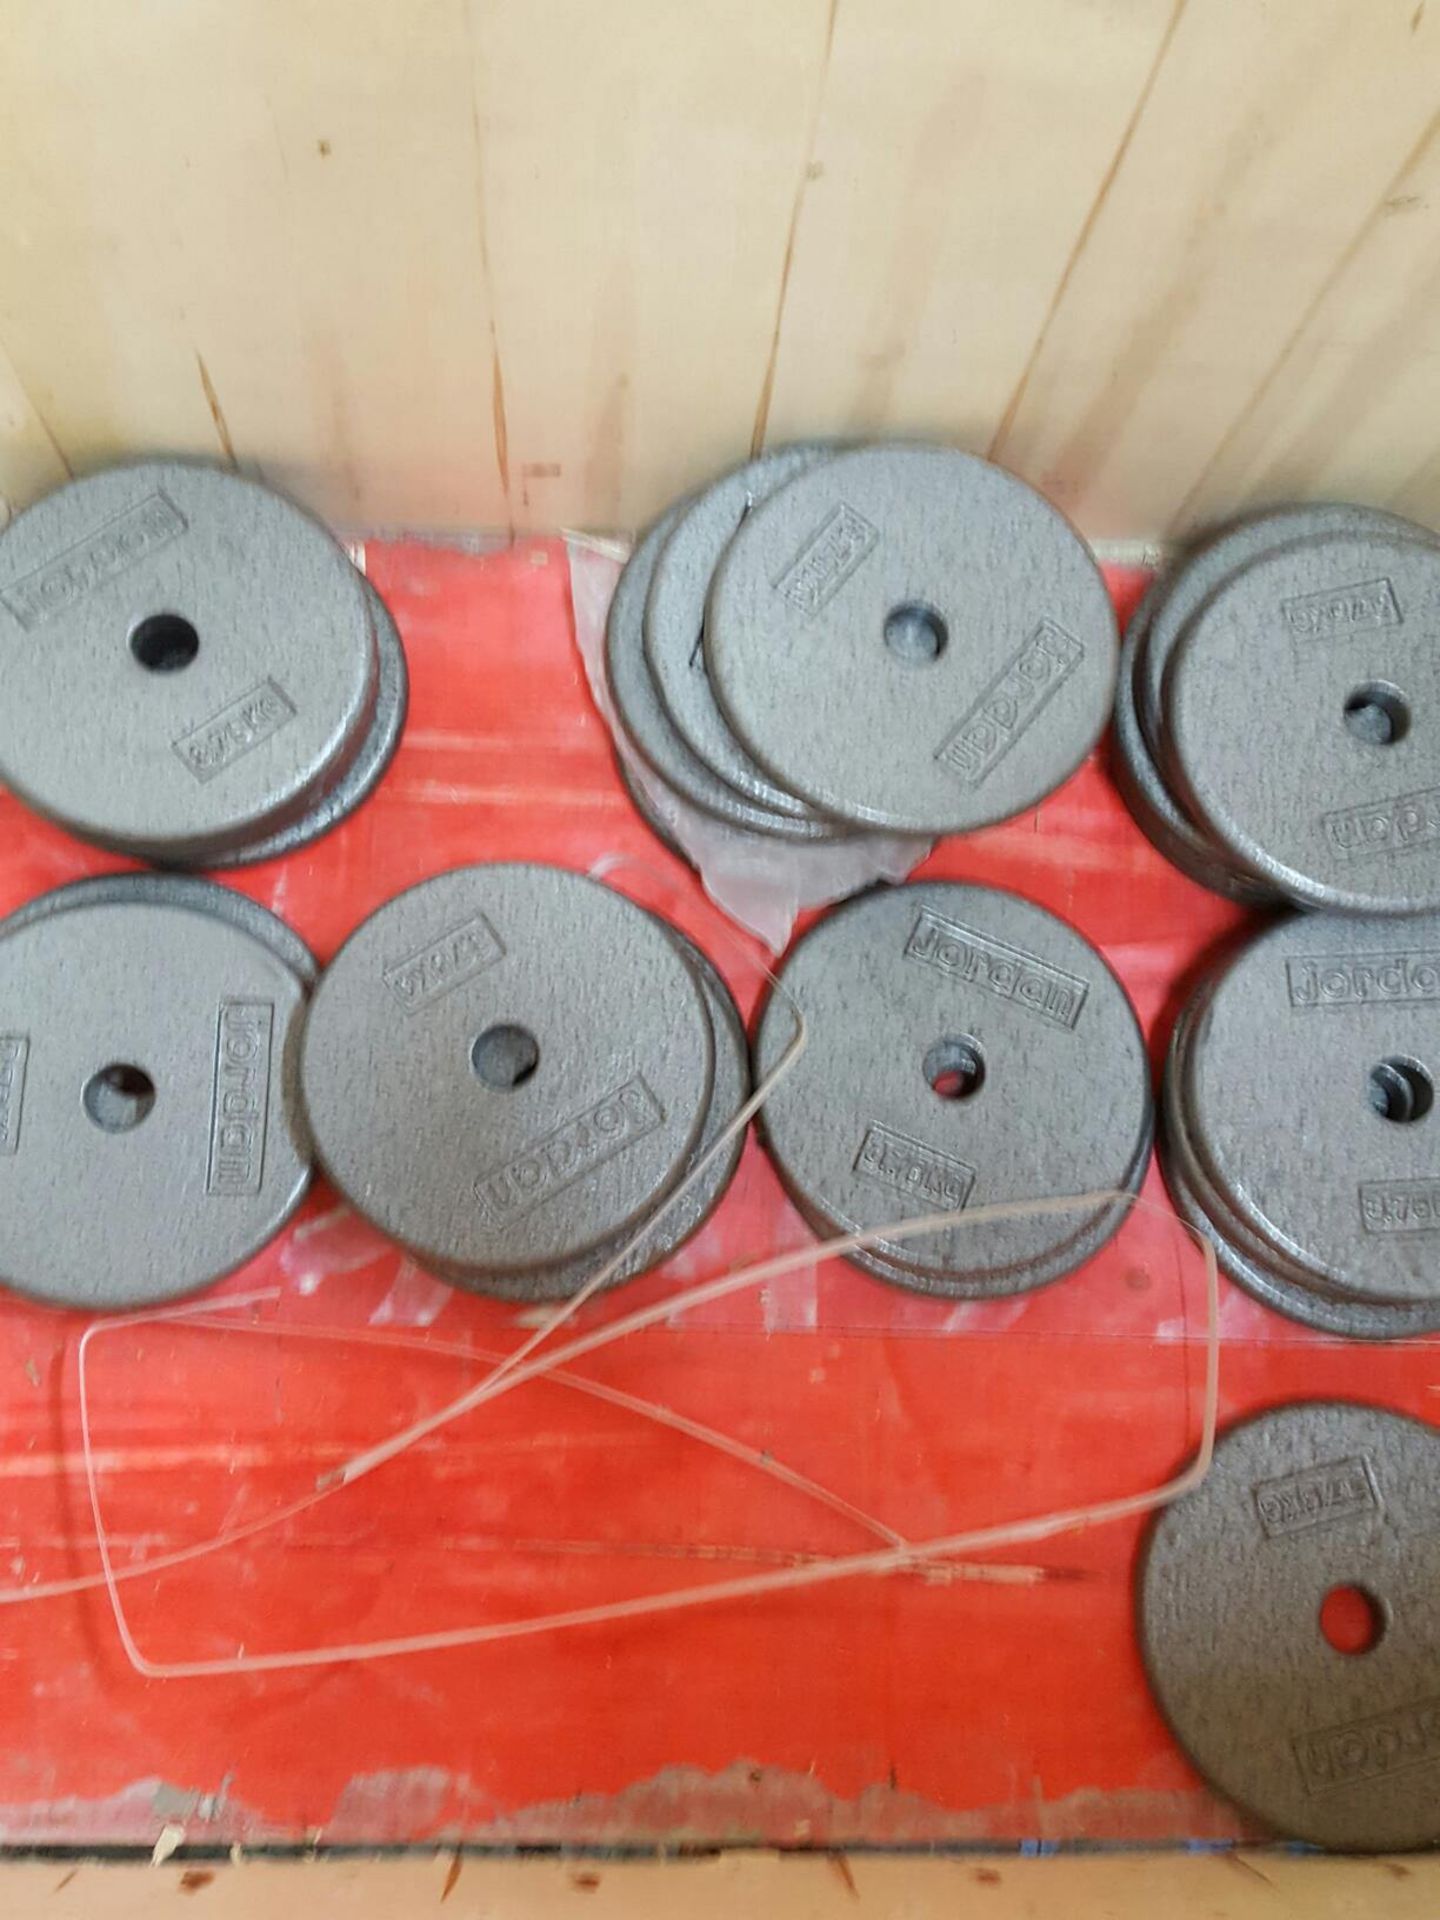 Joblot of Brand New Cast Iron & Rubber Dumbbells, Discs, Plates and Handles. Low 10% Buyers Premium - Image 5 of 5